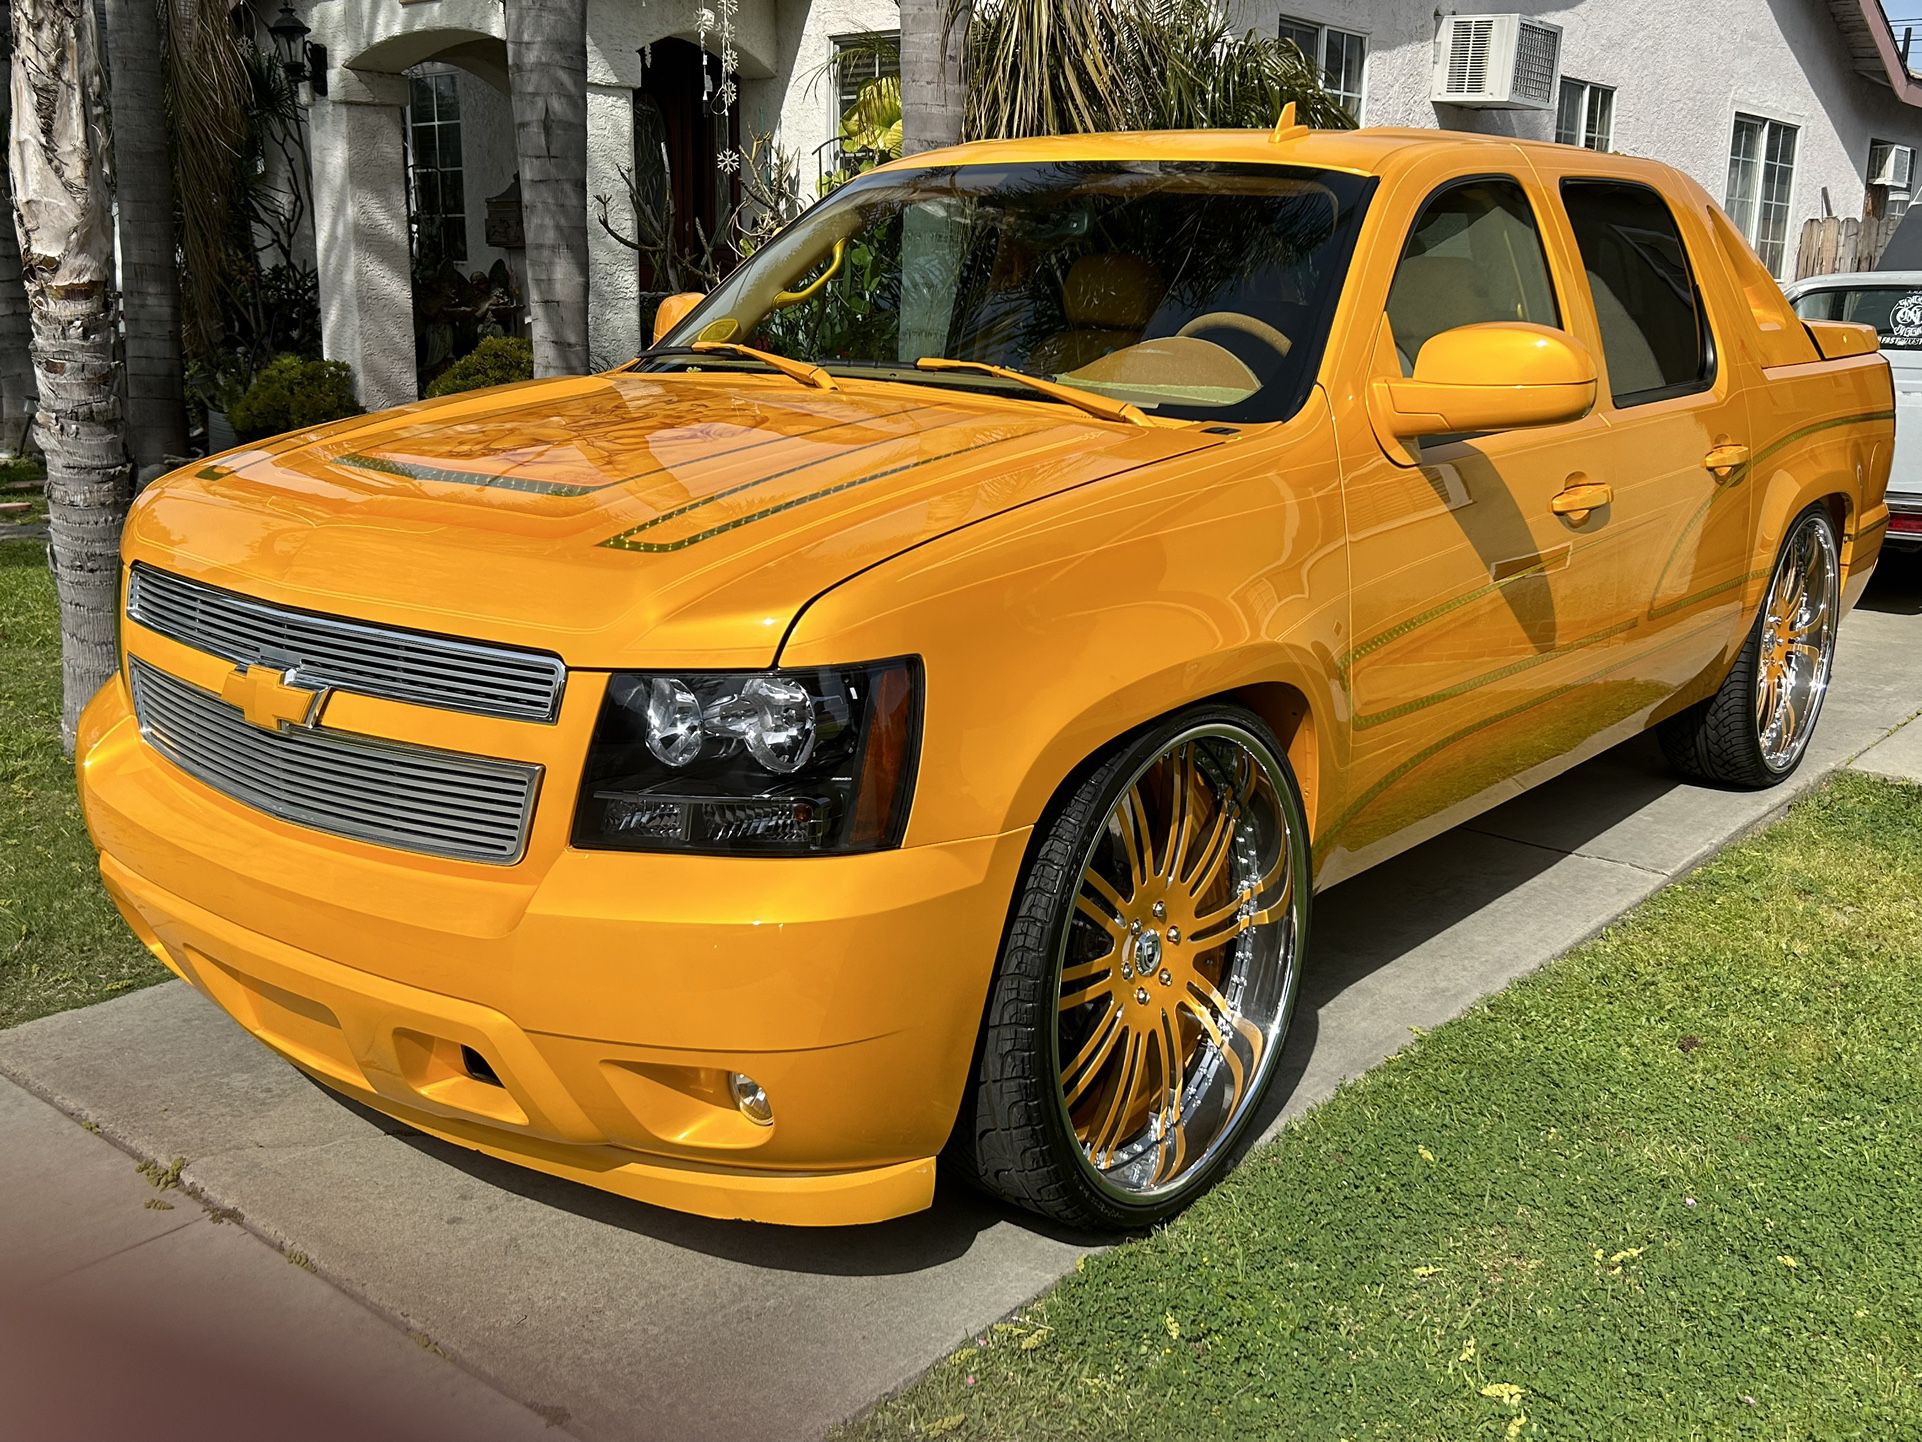 Chevy Avalanche 